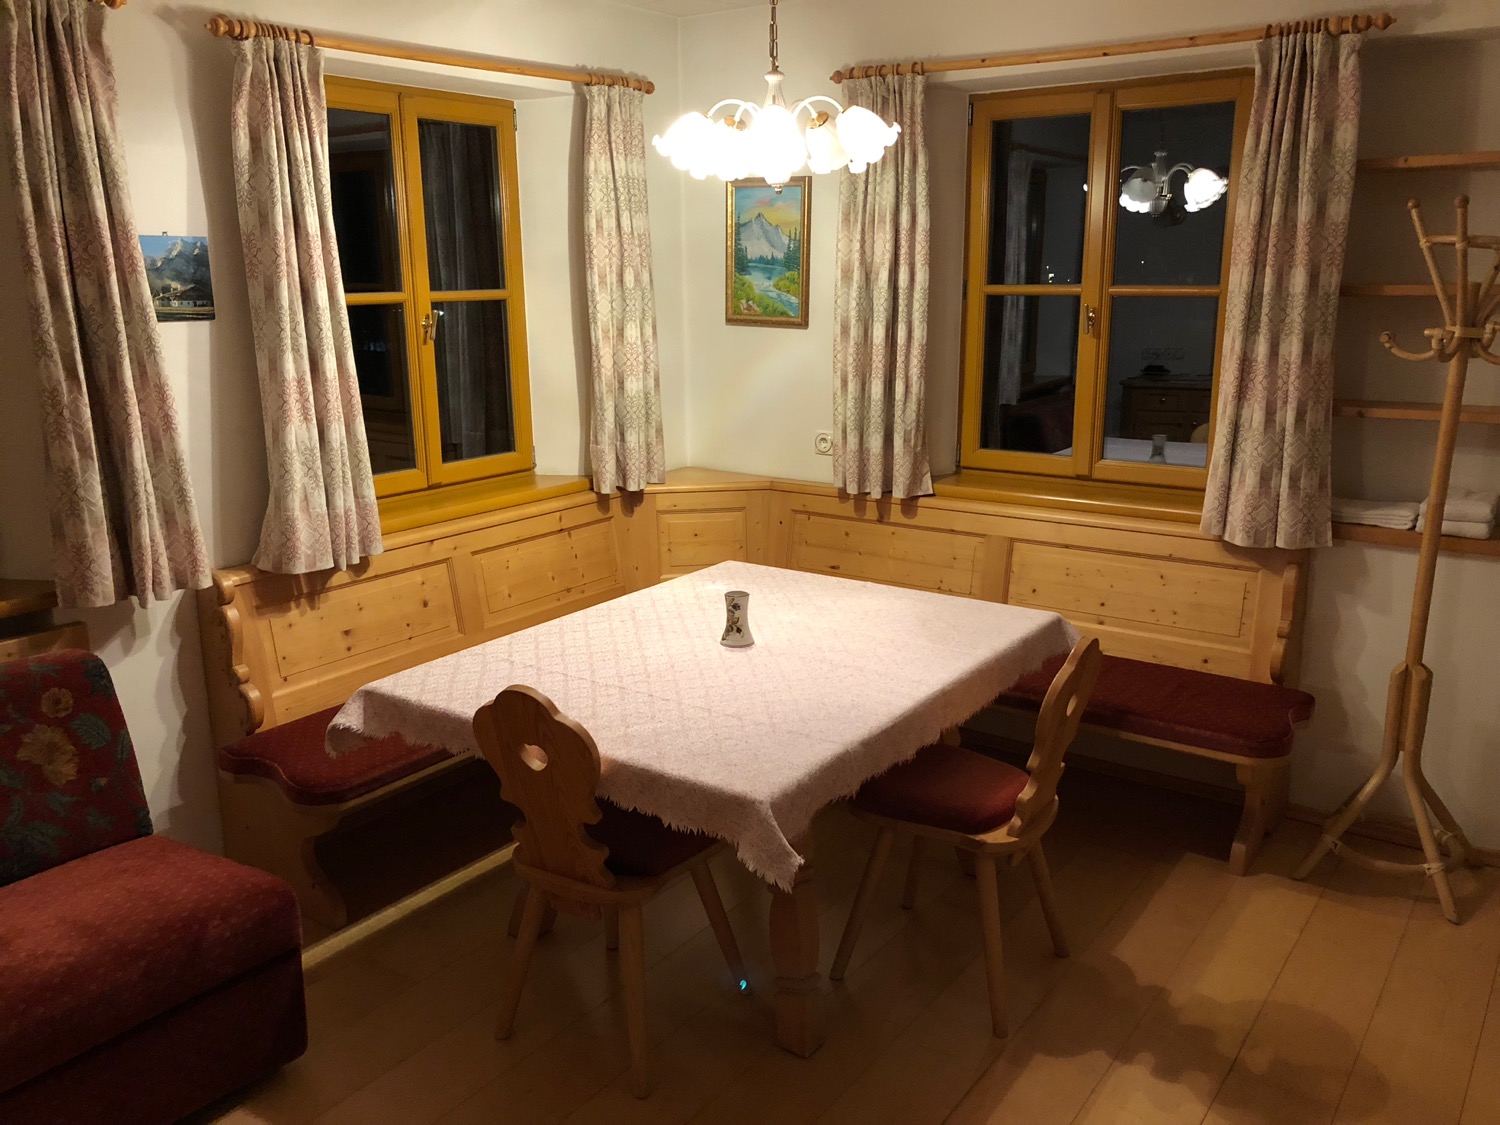 a table with chairs in a room with windows and a chandelier